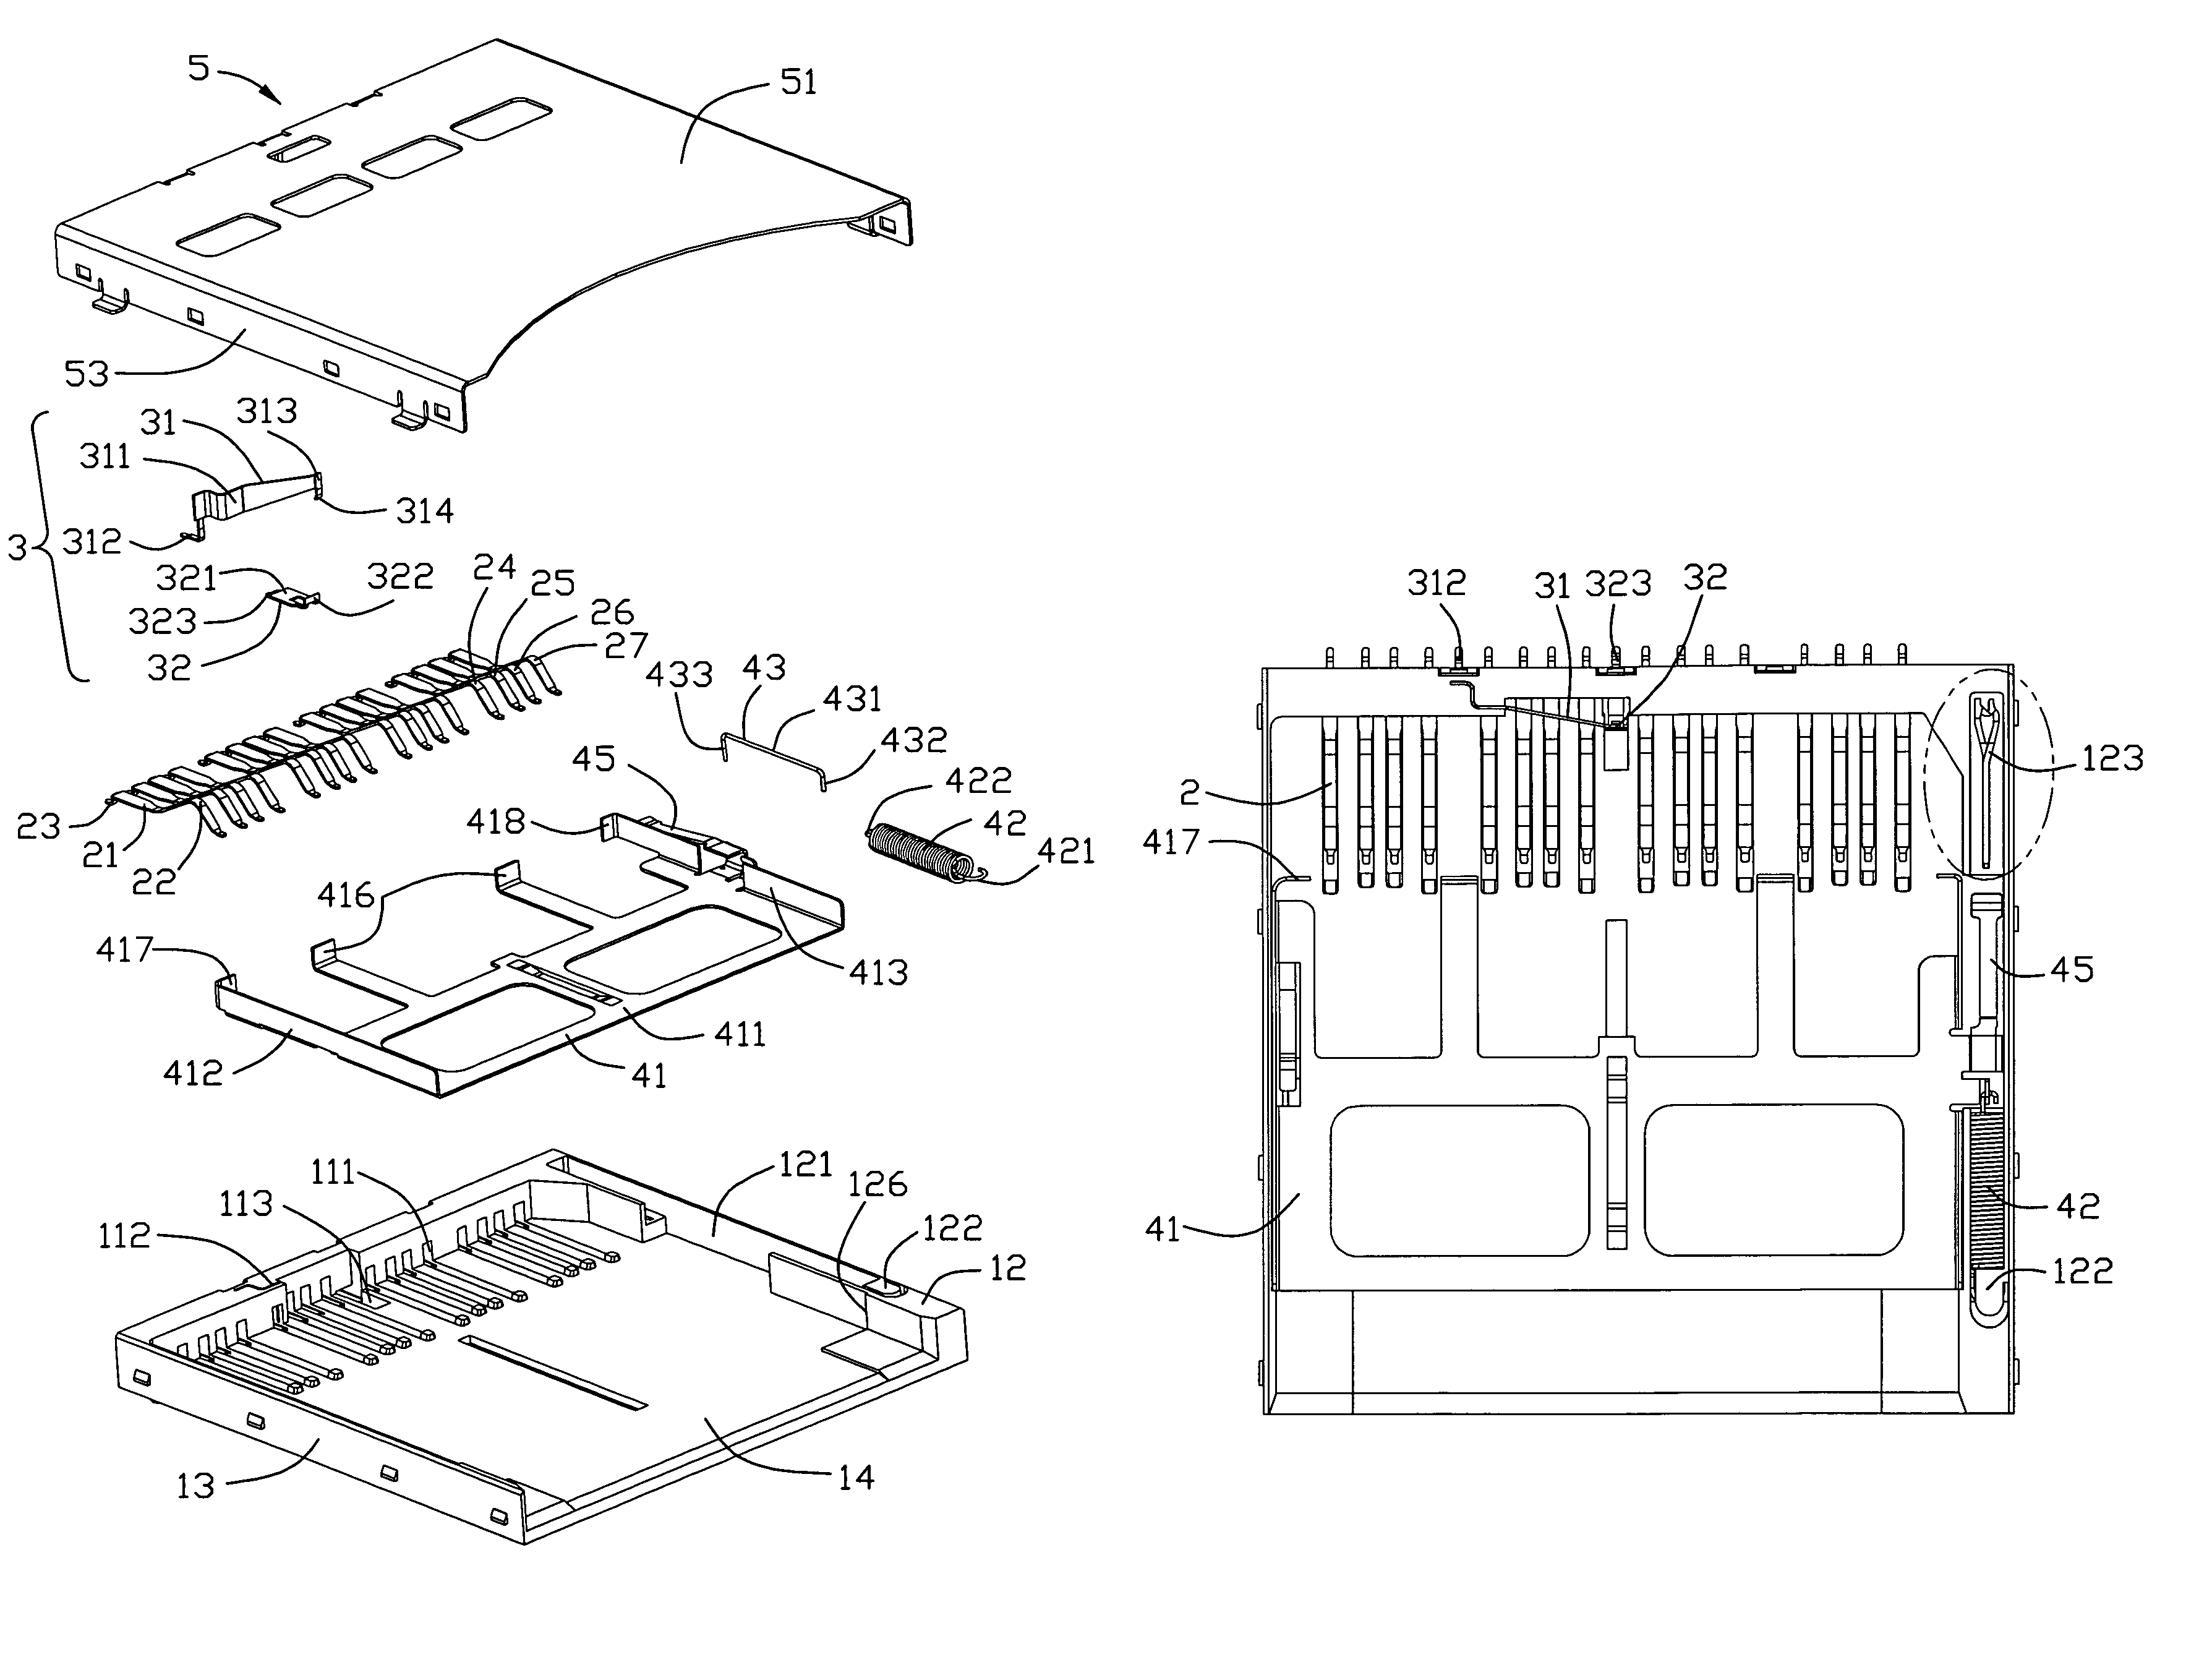 Memory card connector with improved switch contacts for stably detection of card insertion or removal